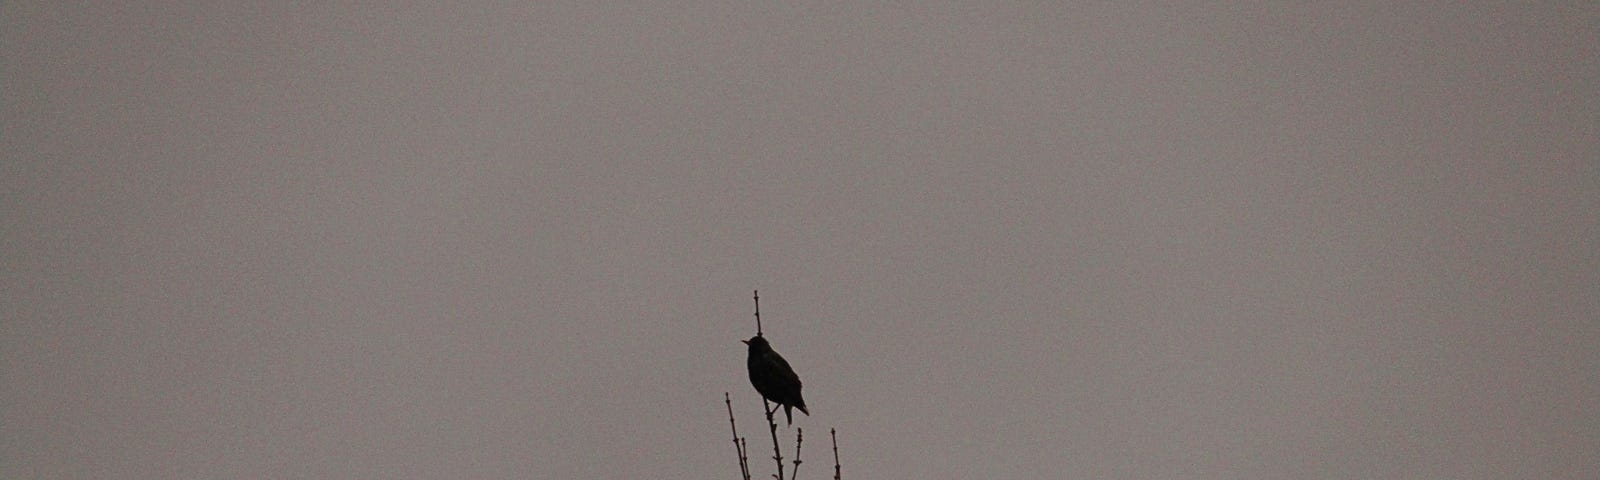 silhouette of a bird at the very top of a tree branch (also in silhouette). Black shapes, gray sky